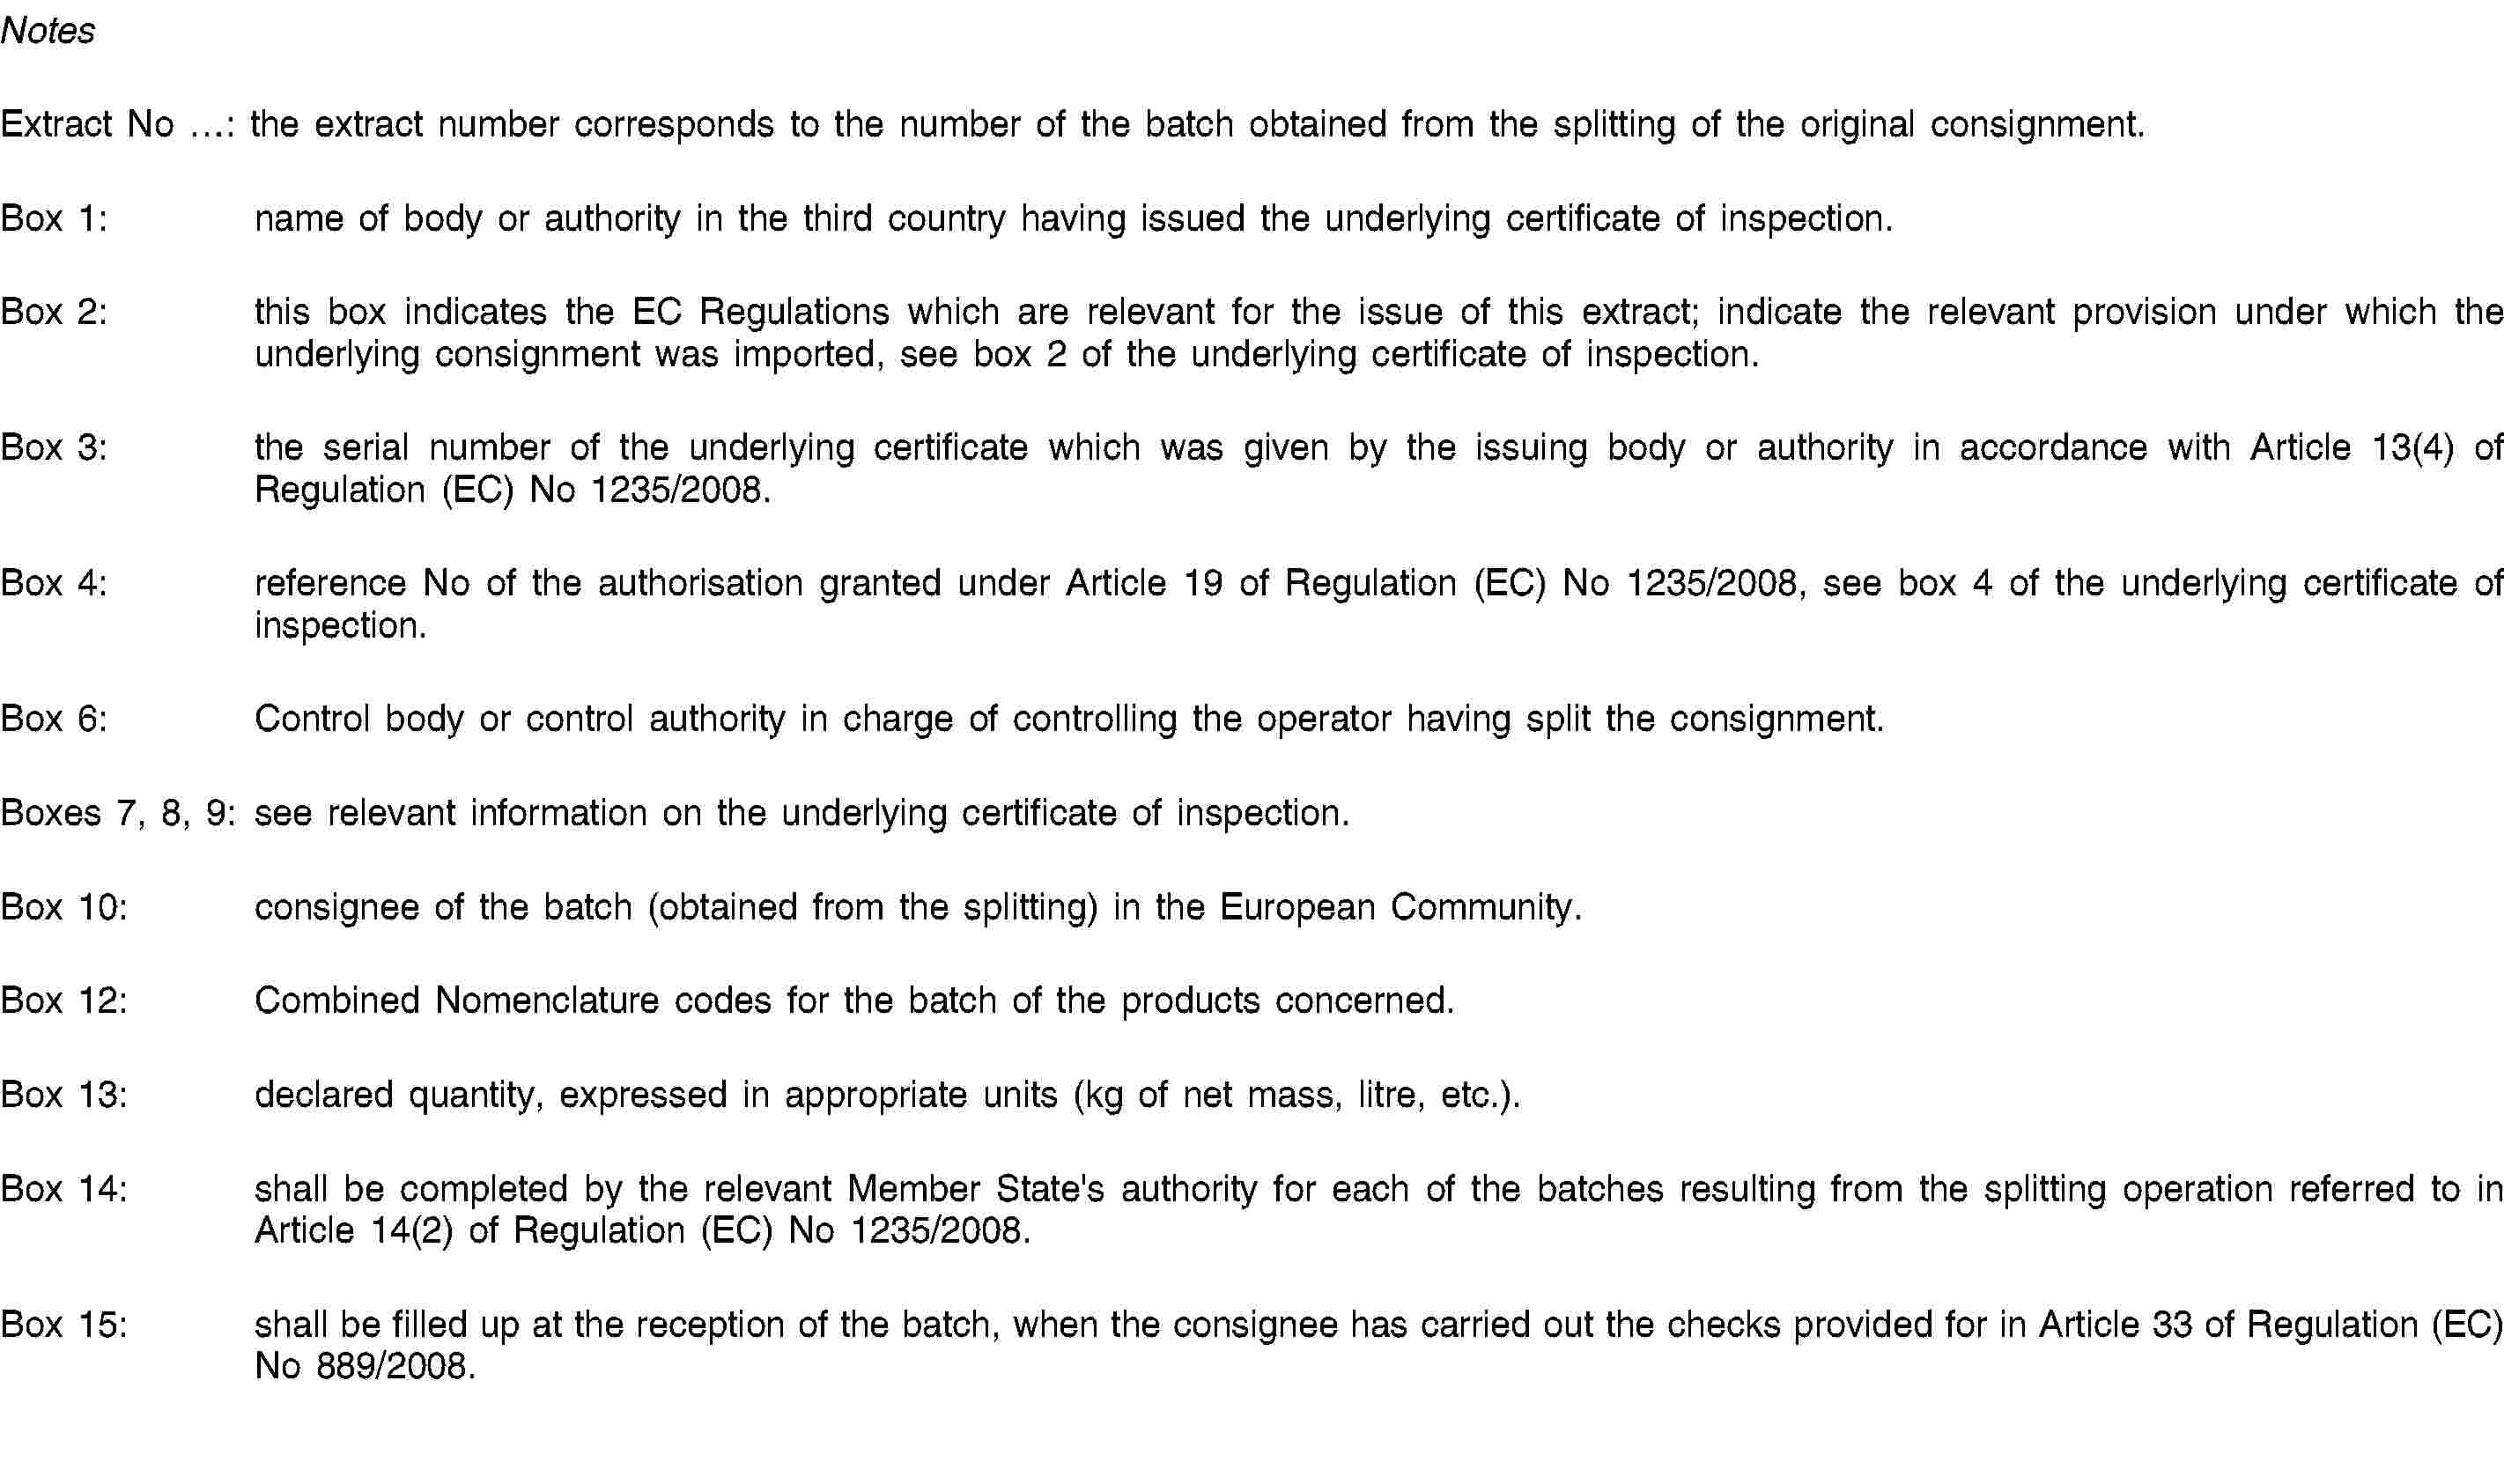 NotesExtract No …: the extract number corresponds to the number of the batch obtained from the splitting of the original consignment.Box 1: name of body or authority in the third country having issued the underlying certificate of inspection.Box 2: this box indicates the EC Regulations which are relevant for the issue of this extract; indicate the relevant provision under which the underlying consignment was imported, see box 2 of the underlying certificate of inspection.Box 3: the serial number of the underlying certificate which was given by the issuing body or authority in accordance with Article 13(4) of Regulation (EC) No 1235/2008.Box 4: reference No of the authorisation granted under Article 19 of Regulation (EC) No 1235/2008, see box 4 of the underlying certificate of inspection.Box 6: Control body or control authority in charge of controlling the operator having split the consignment.Boxes 7, 8, 9: see relevant information on the underlying certificate of inspection.Box 10: consignee of the batch (obtained from the splitting) in the European Community.Box 12: Combined Nomenclature codes for the batch of the products concerned.Box 13: declared quantity, expressed in appropriate units (kg of net mass, litre, etc.).Box 14: shall be completed by the relevant Member State's authority for each of the batches resulting from the splitting operation referred to in Article 14(2) of Regulation (EC) No 1235/2008.Box 15: shall be filled up at the reception of the batch, when the consignee has carried out the checks provided for in Article 33 of Regulation (EC) No 889/2008.